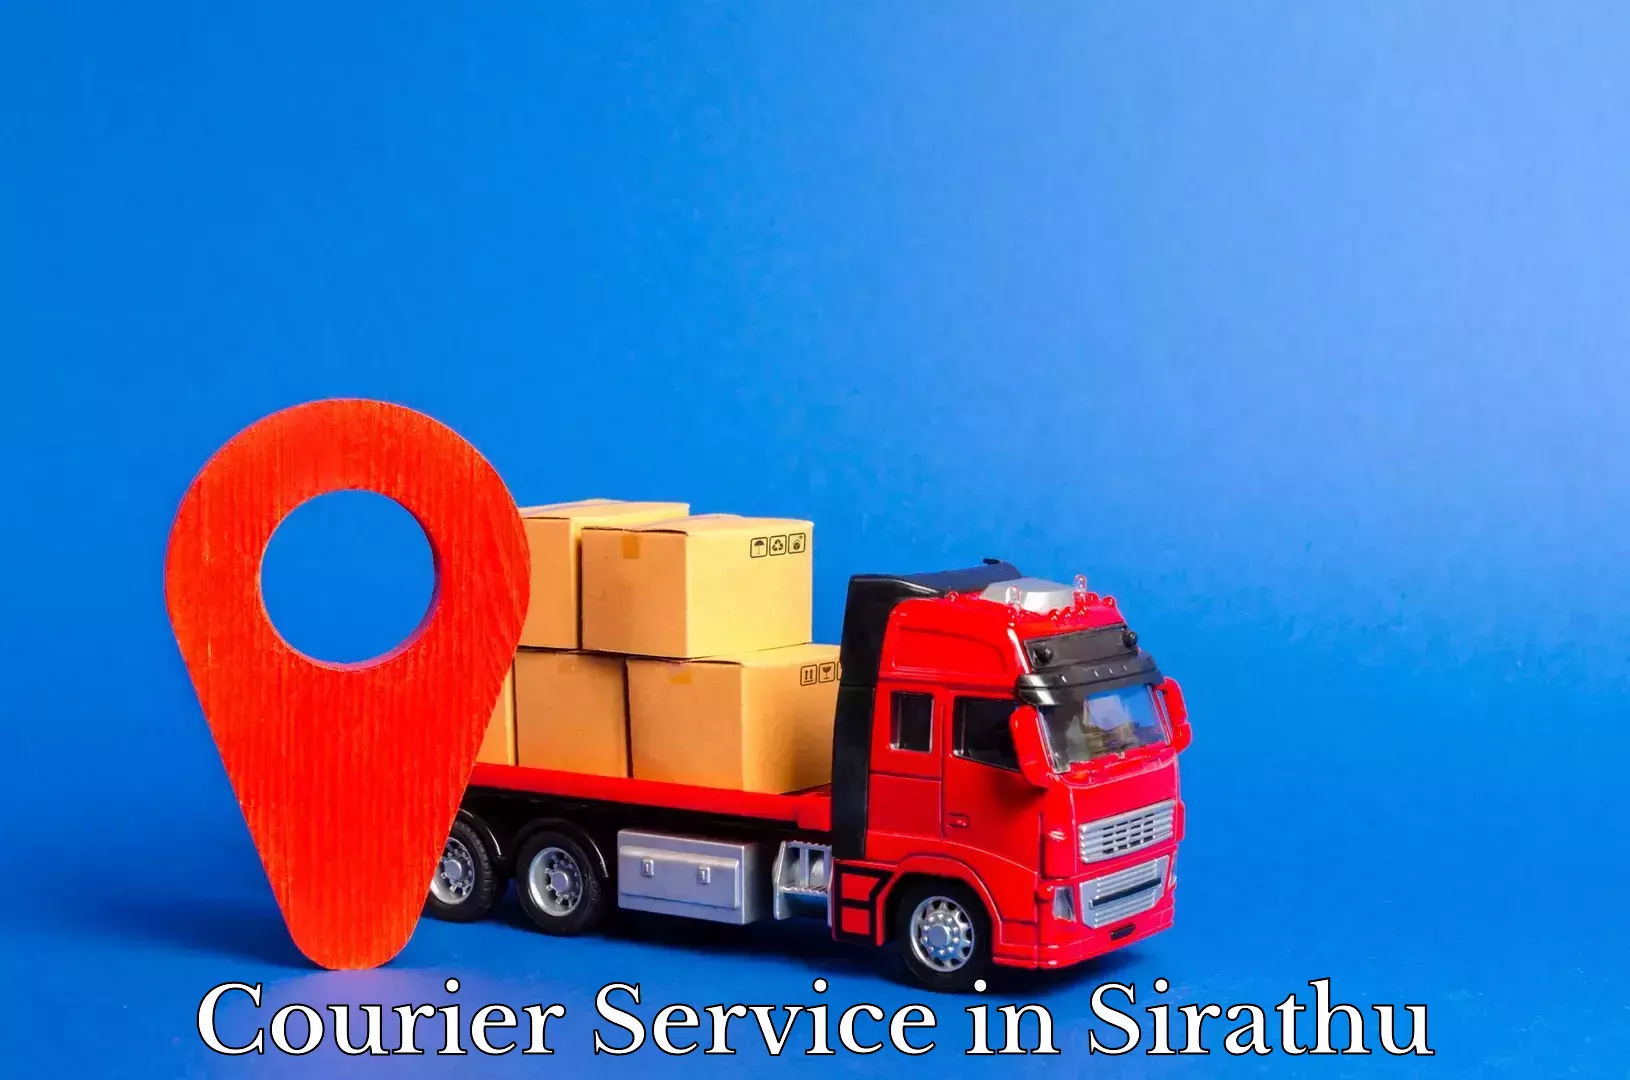 Express courier capabilities in Sirathu